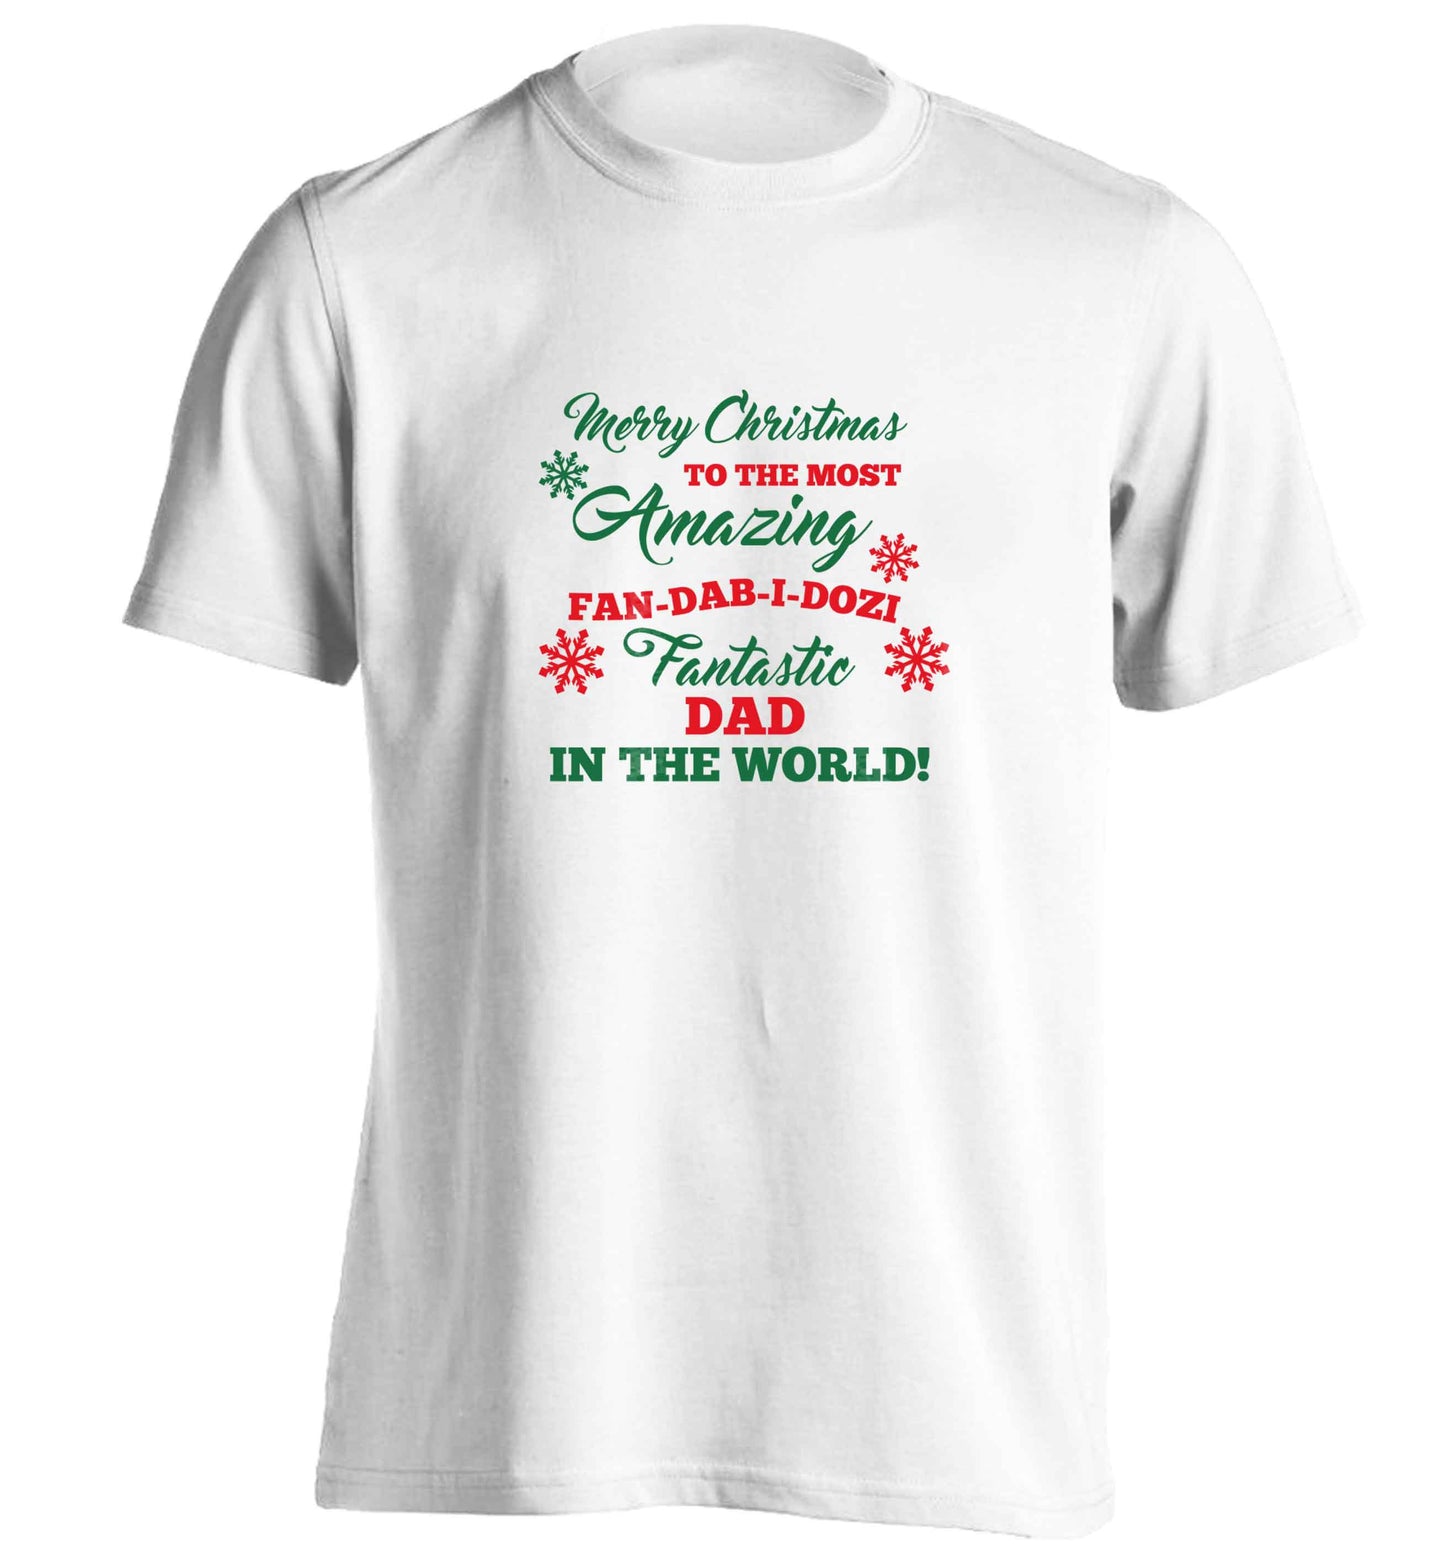 Merry Christmas to the most amazing fan-dab-i-dozi fantasic Dad in the world adults unisex white Tshirt 2XL